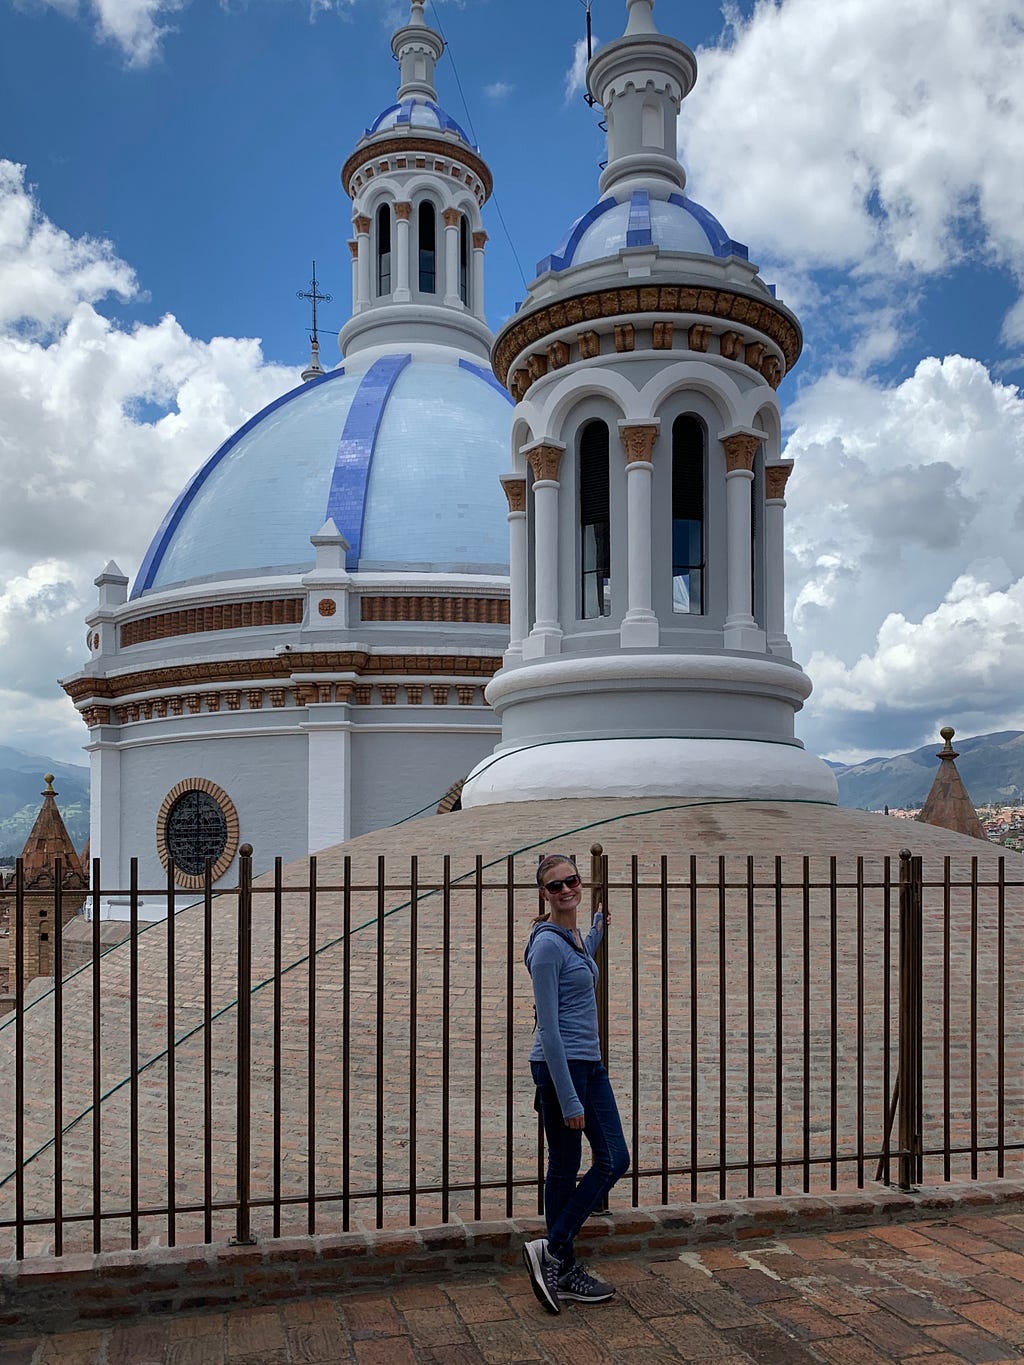 Woman standing in front of Cuenca’s Cathedral sky blue domes set against a blue sky with fluffy white clouds.